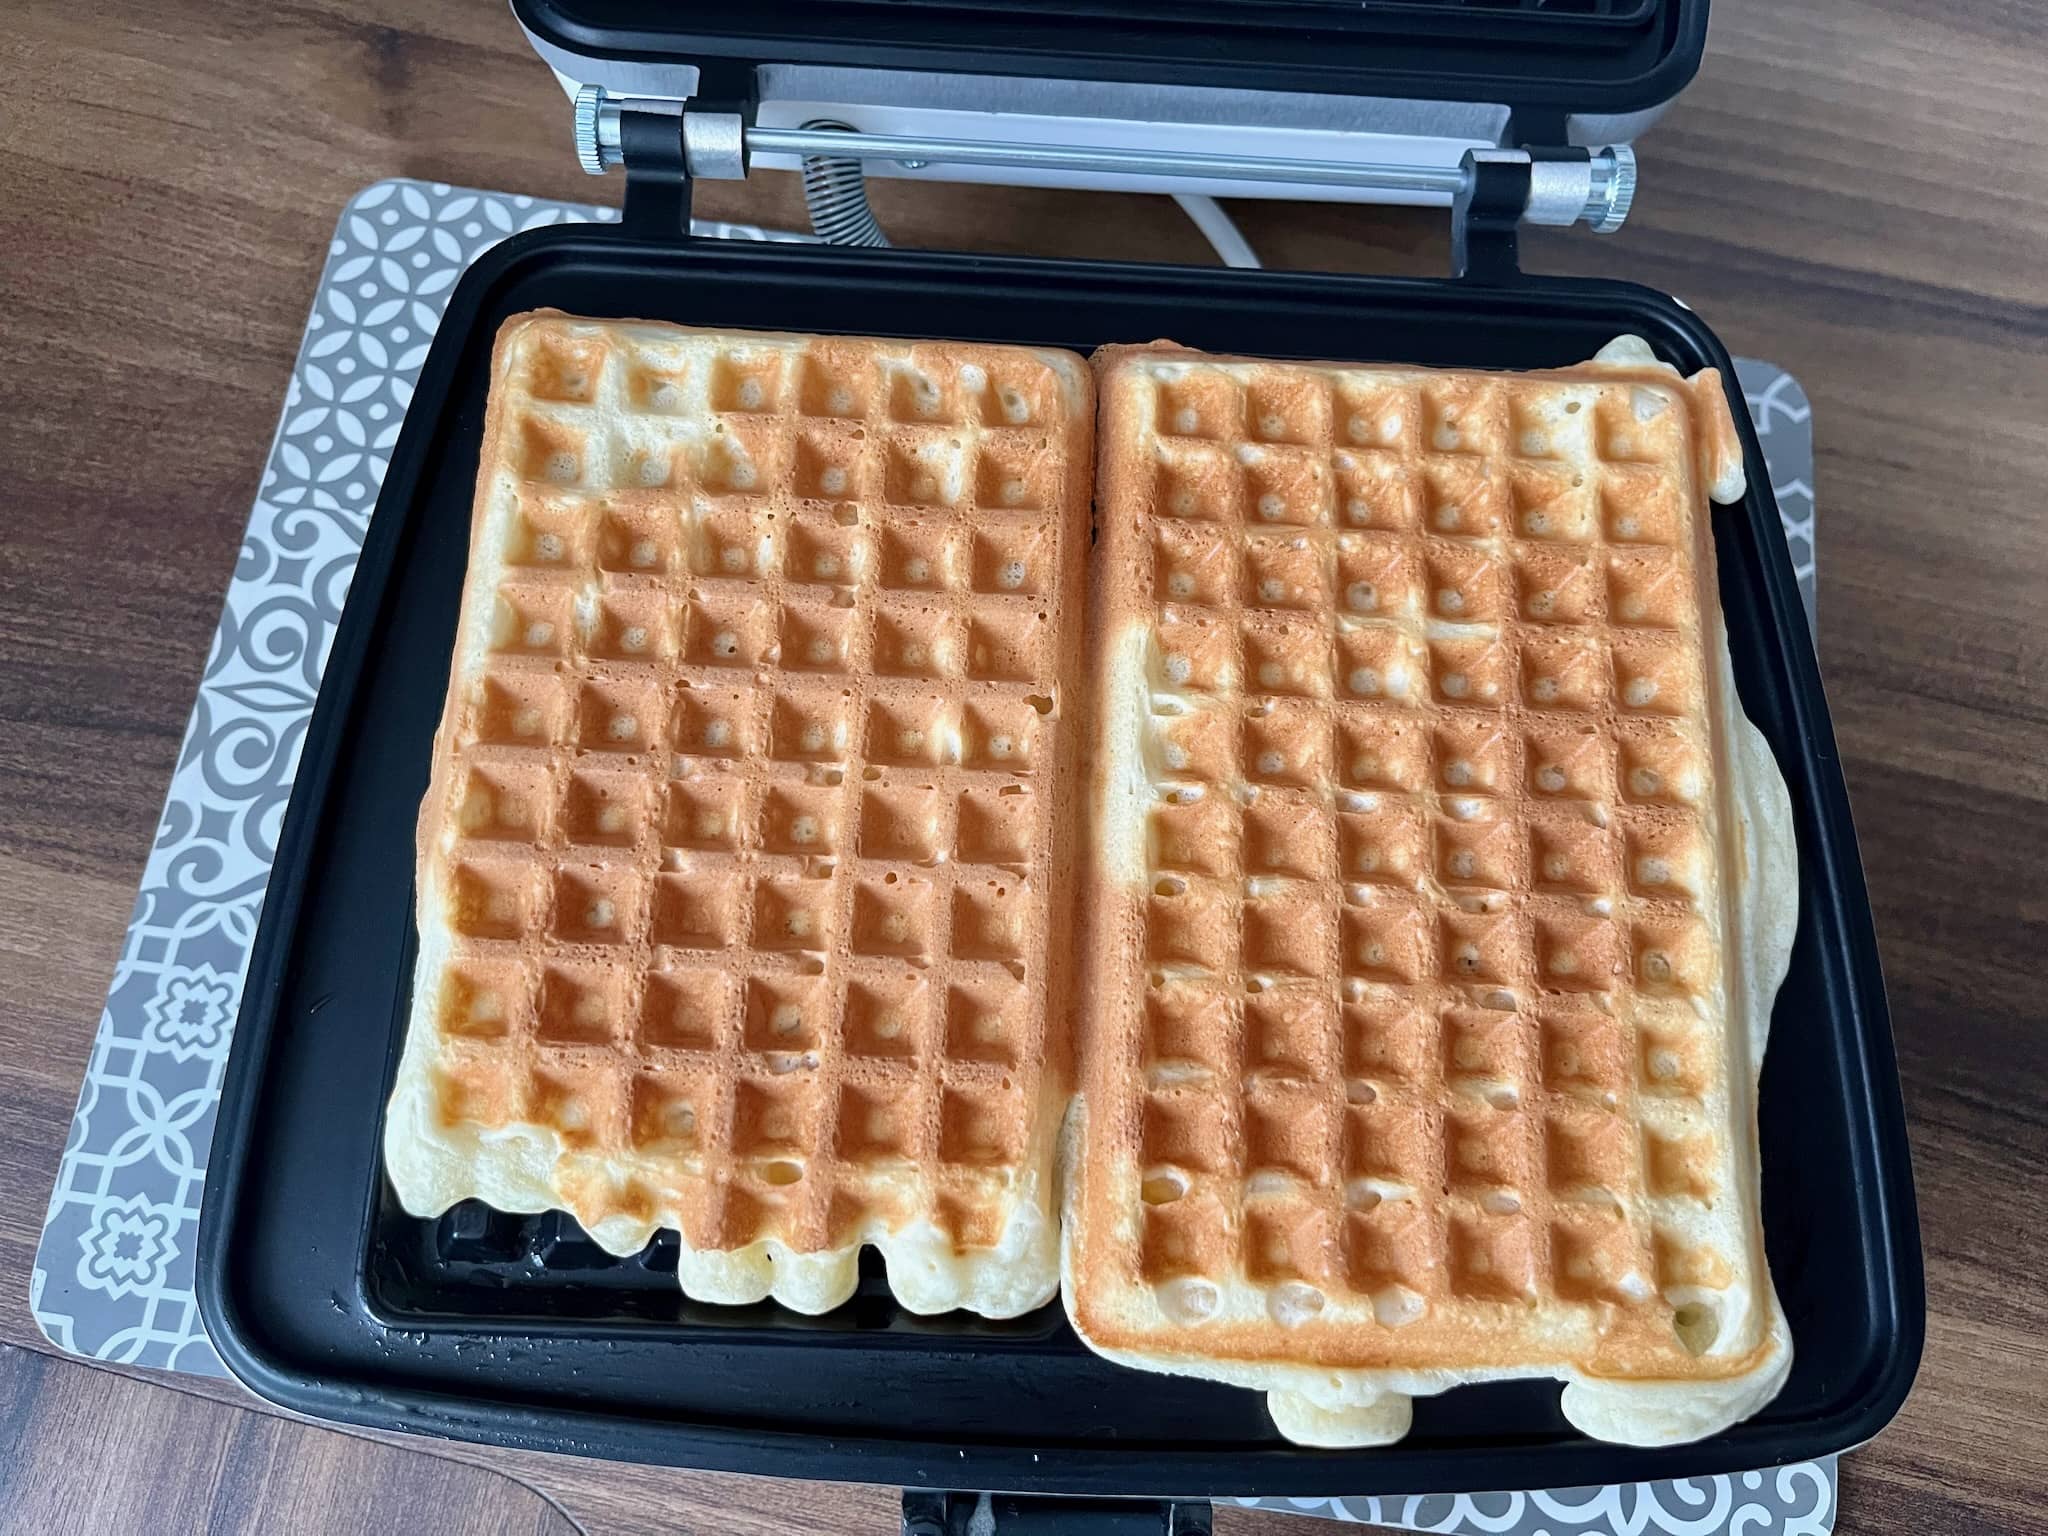 Waffles ready to be taken out from the waffle maker